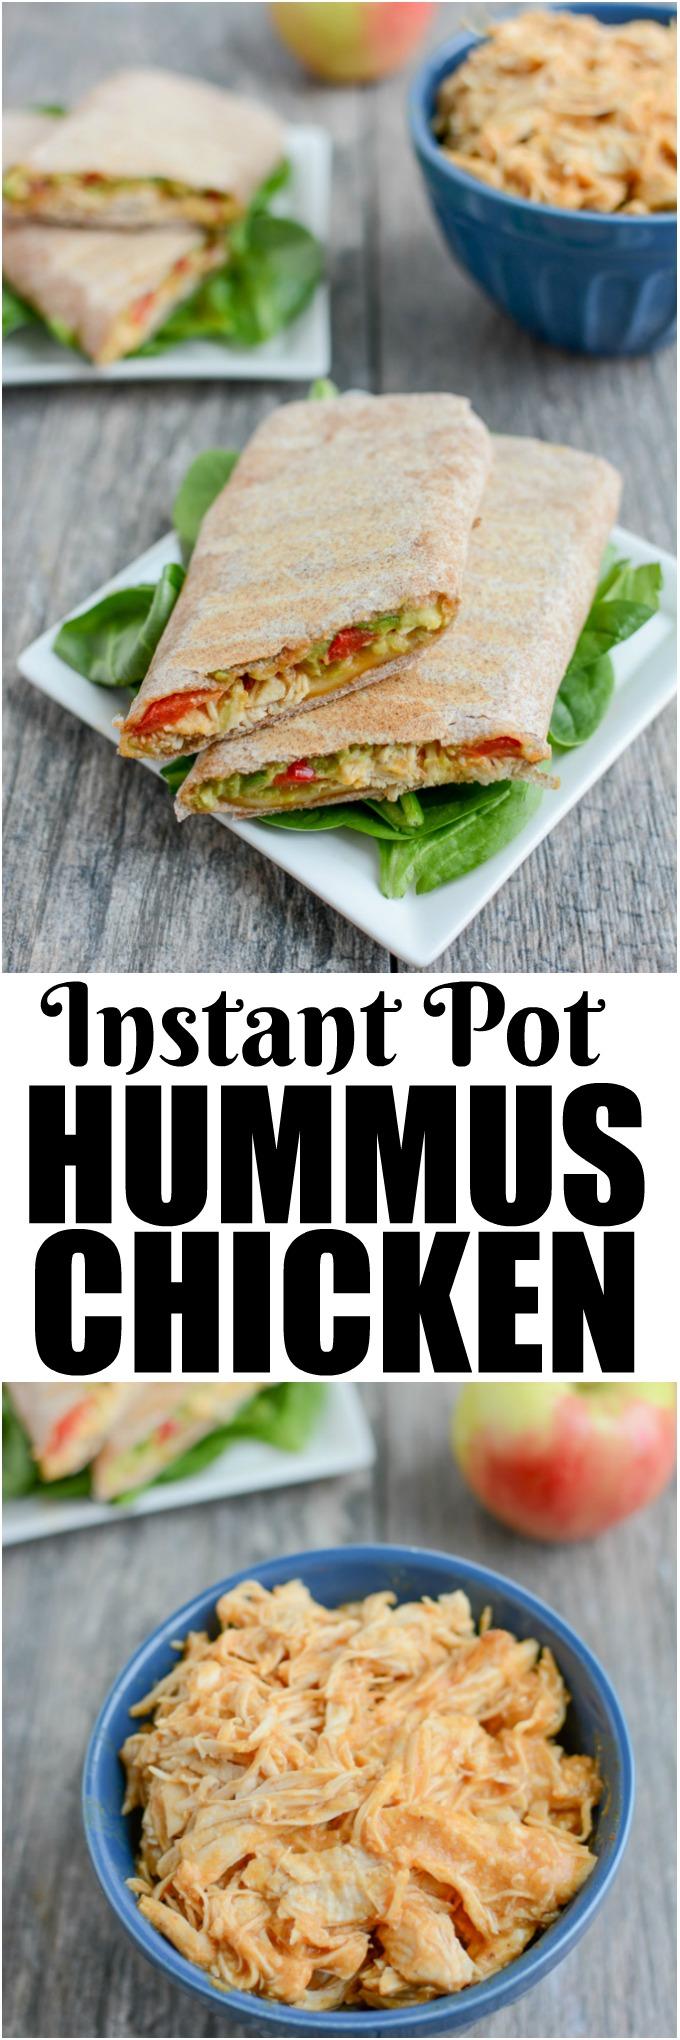 This Instant Pot Shredded Hummus Chicken is a simple, healthy recipe that can be made during food prep and served alone or in a wrap for a quick lunch or dinner.